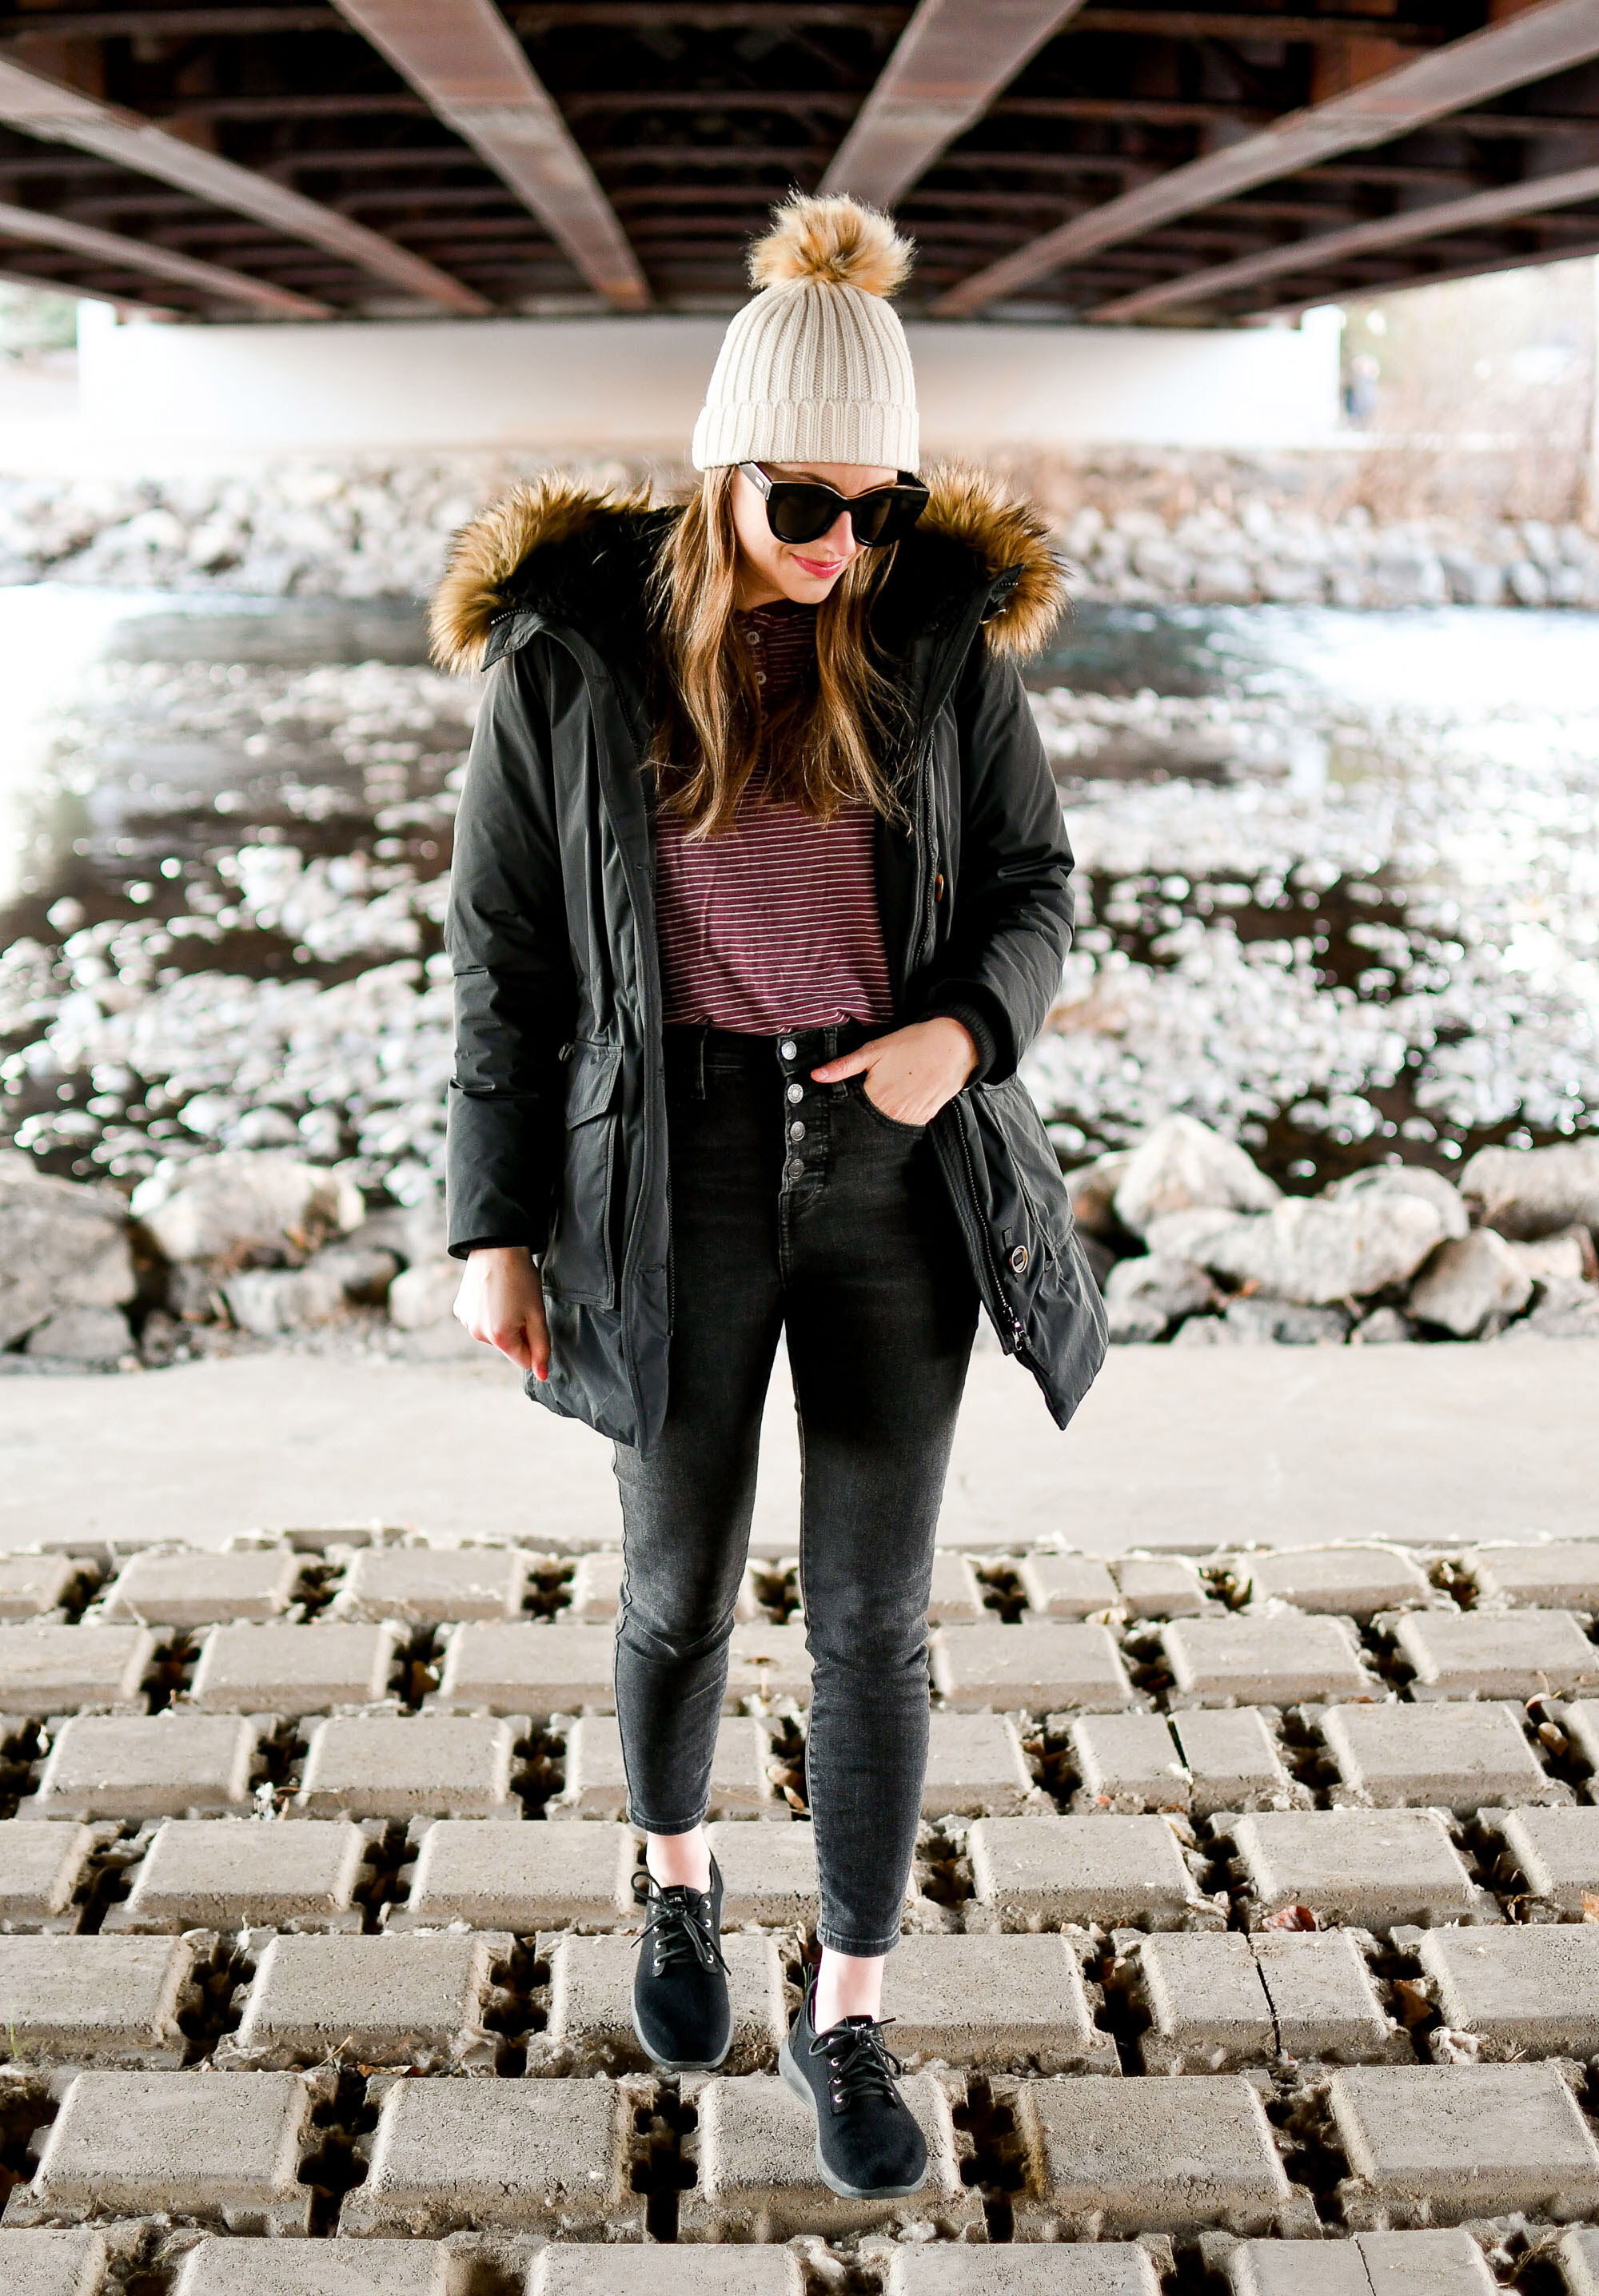 Favorite outfit: Winter by the river — Cotton Cashmere Cat Hair